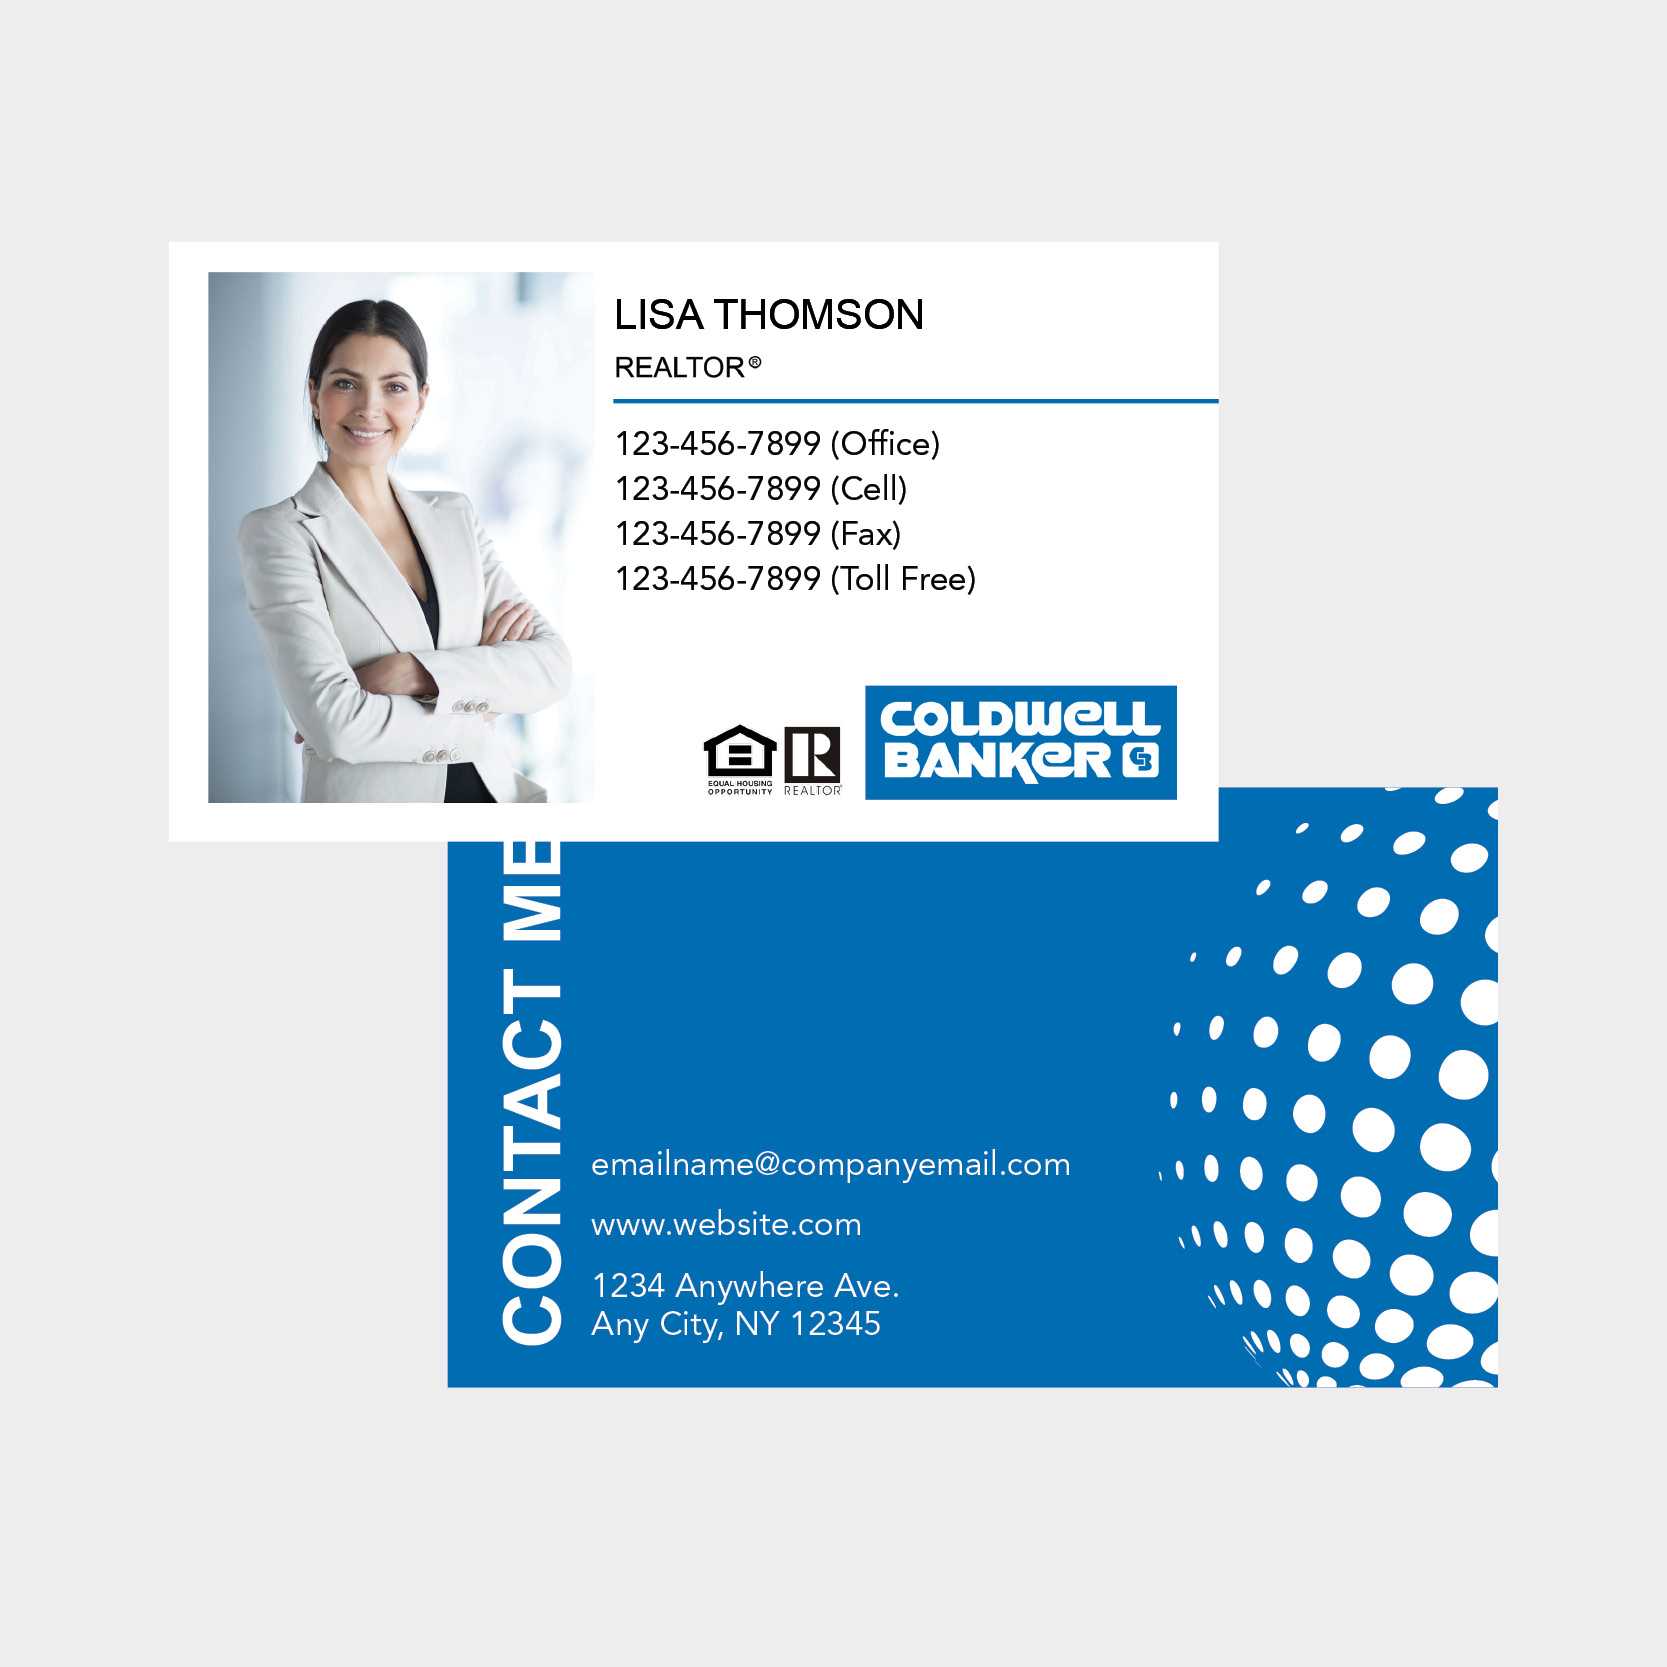 Coldwell Banker Business Cards With Coldwell Banker Business Card Template